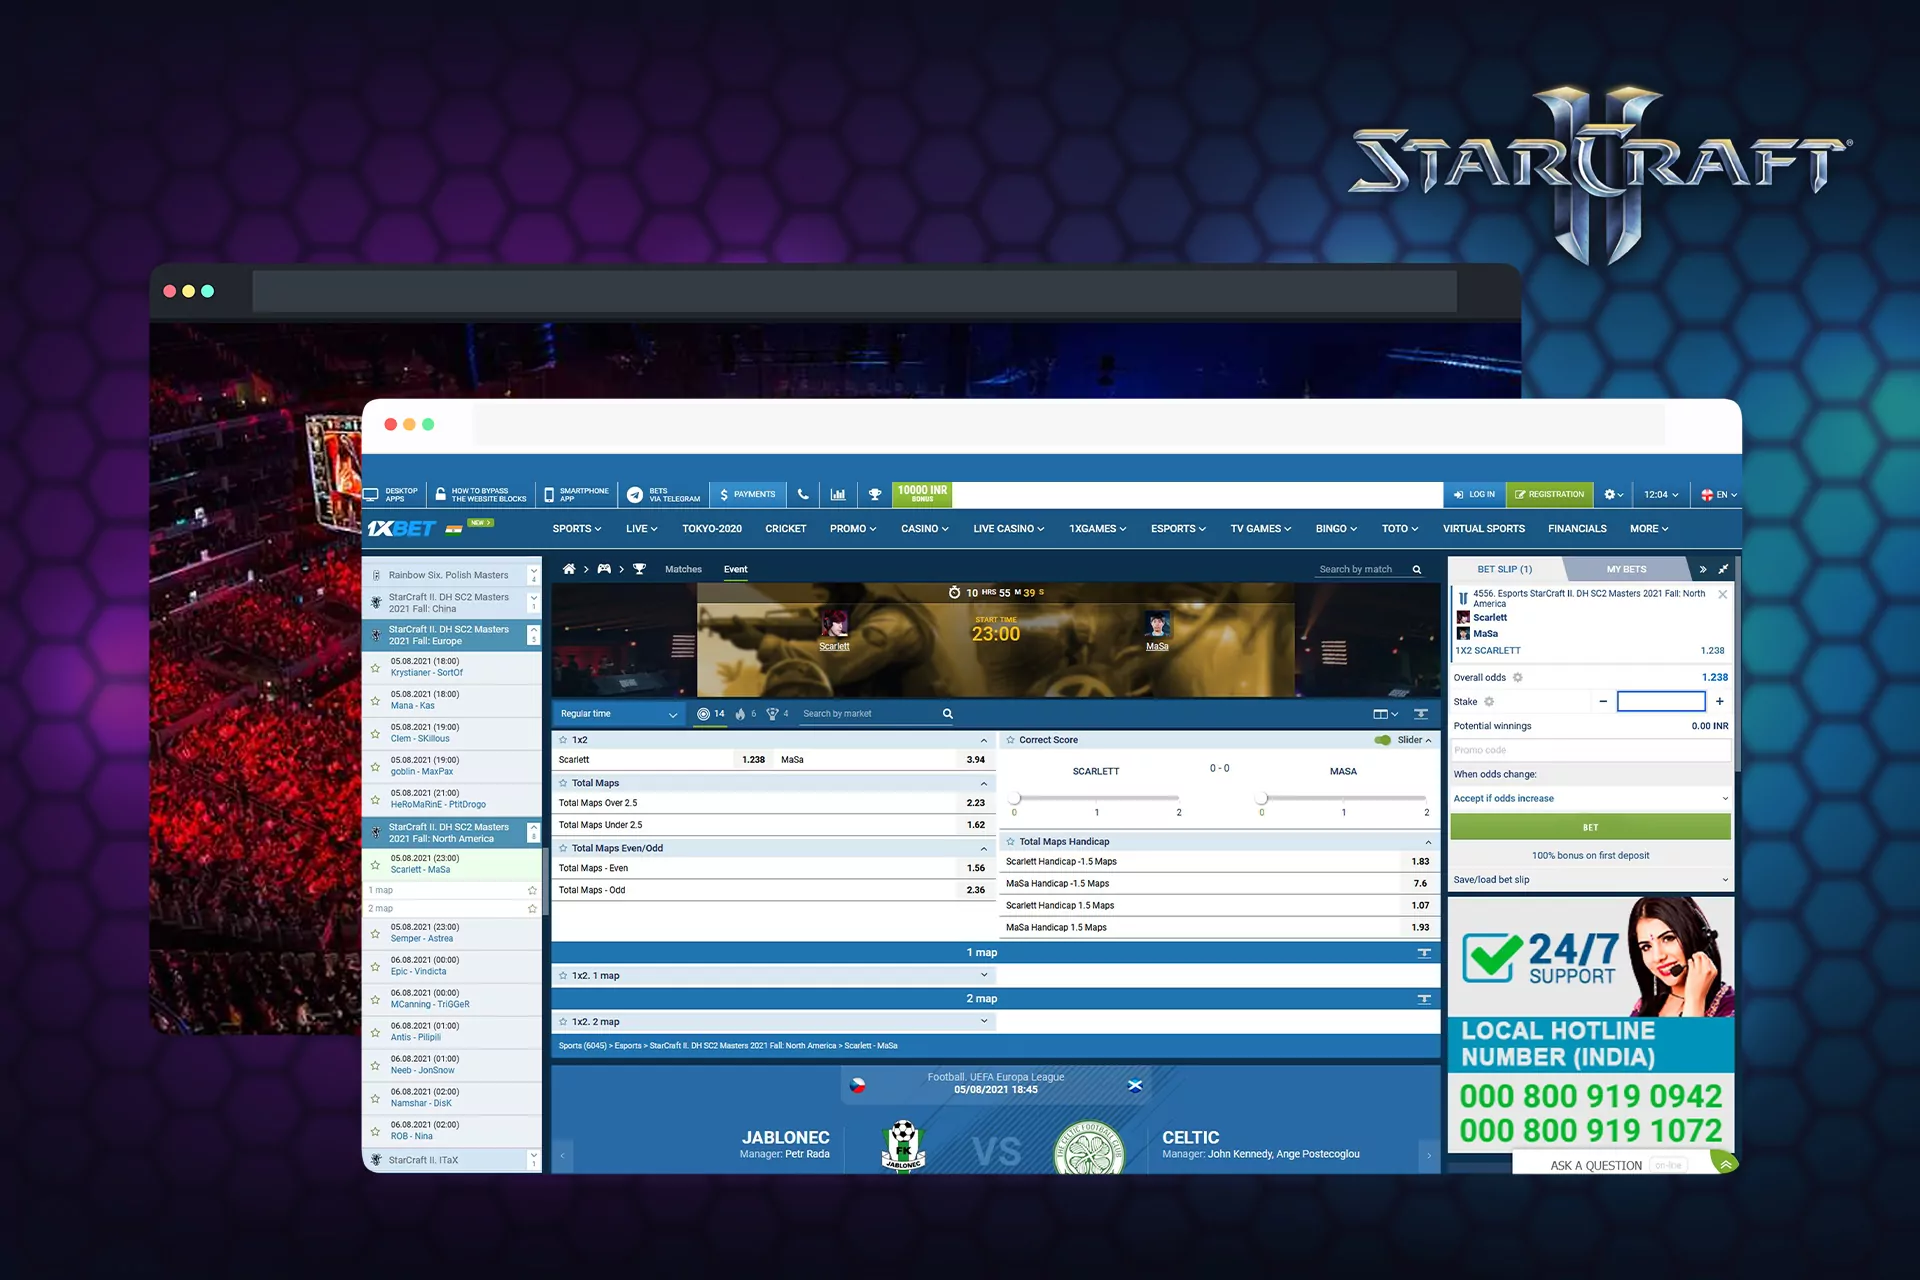 Choose the match of Starcraft II and place your bet.